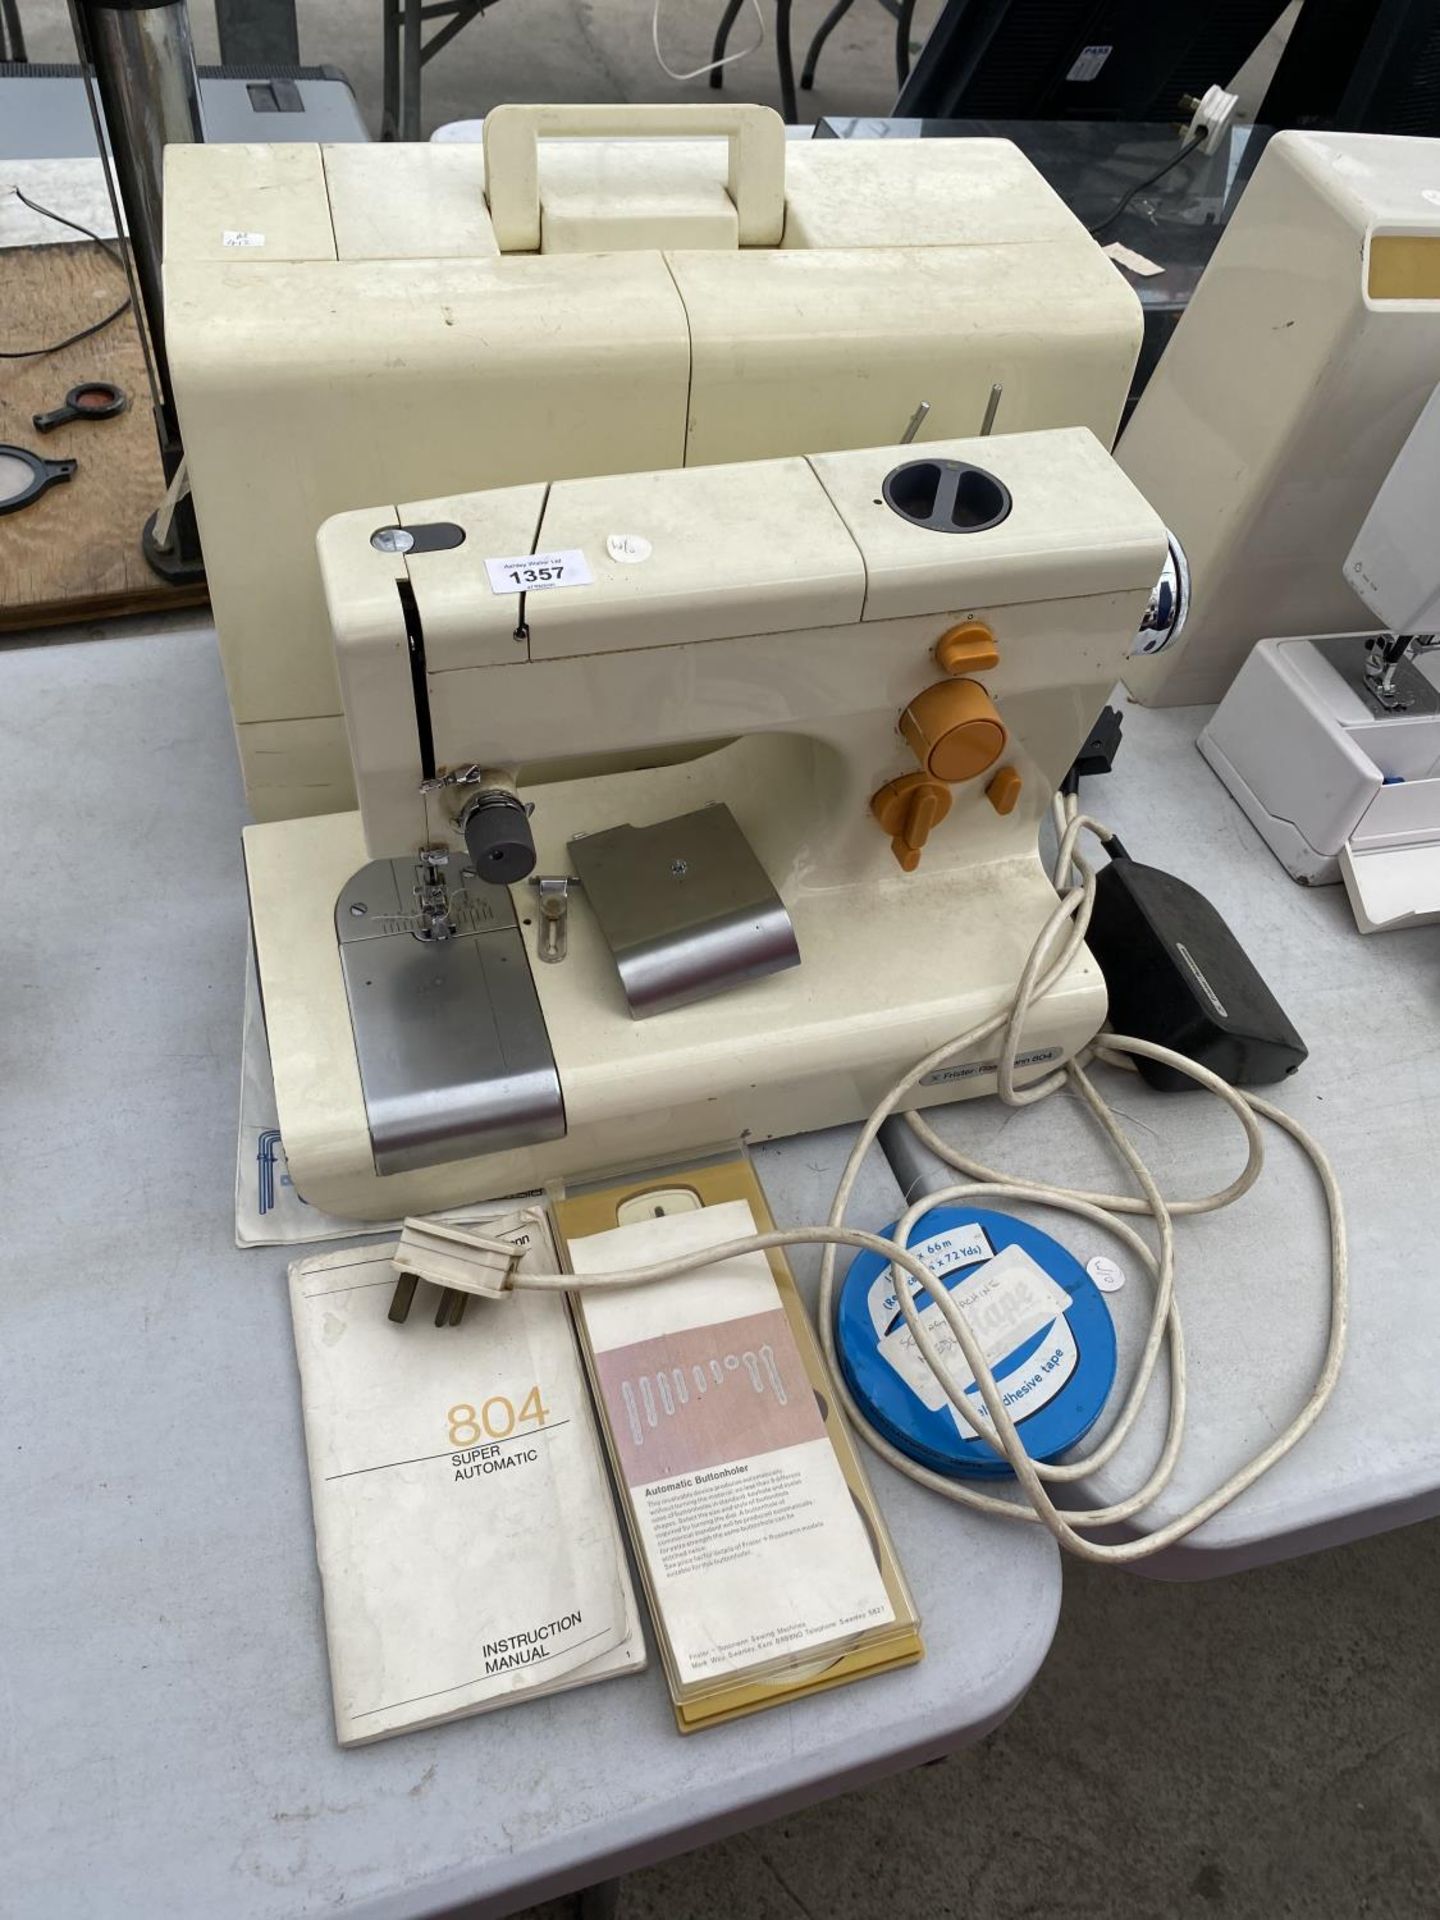 A CASED FRISTER ROSSMANN SEWING MACHINE WITH ACCESSORIES IN WORKING ORDER